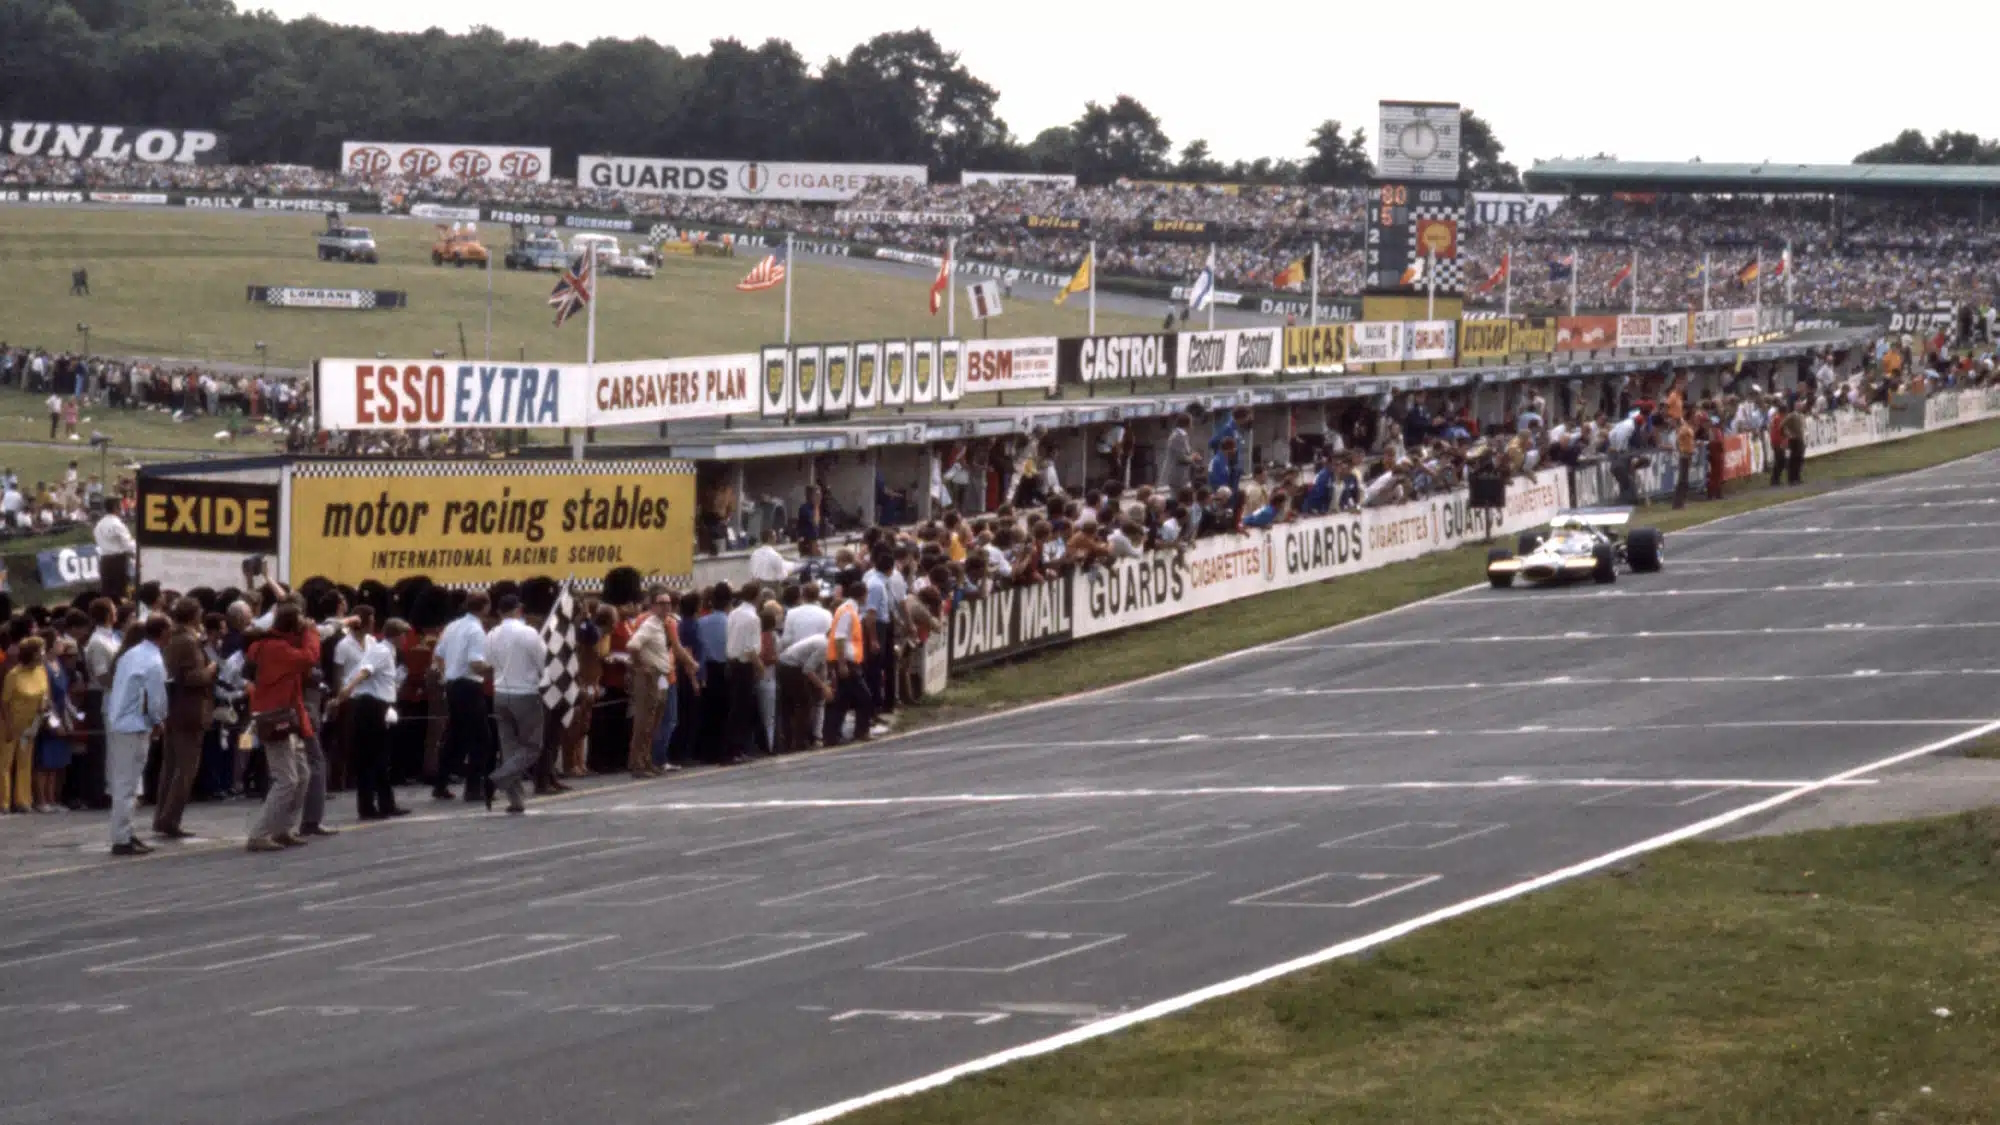 Jack-Brabham-coasts-to-the-finish-line-at-Brands-Hatch-to-take-second-place-at-the-1970-Britis...jpg